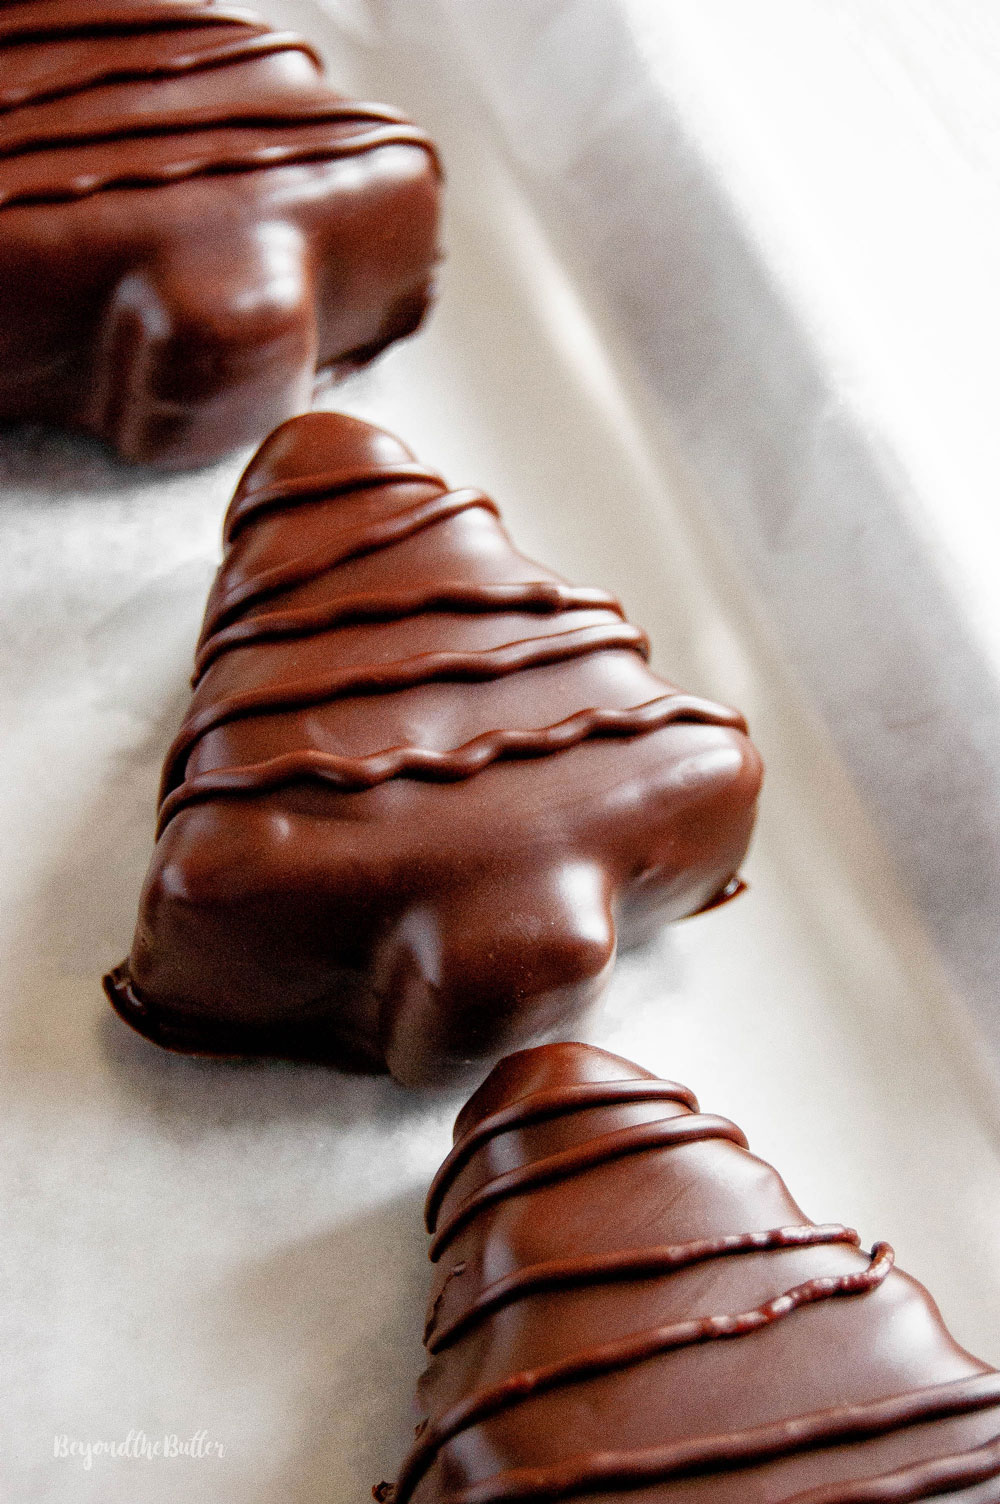 Chocolate Covered Peanut Butter Christmas Trees | All Images © Beyond the Butter, LLC